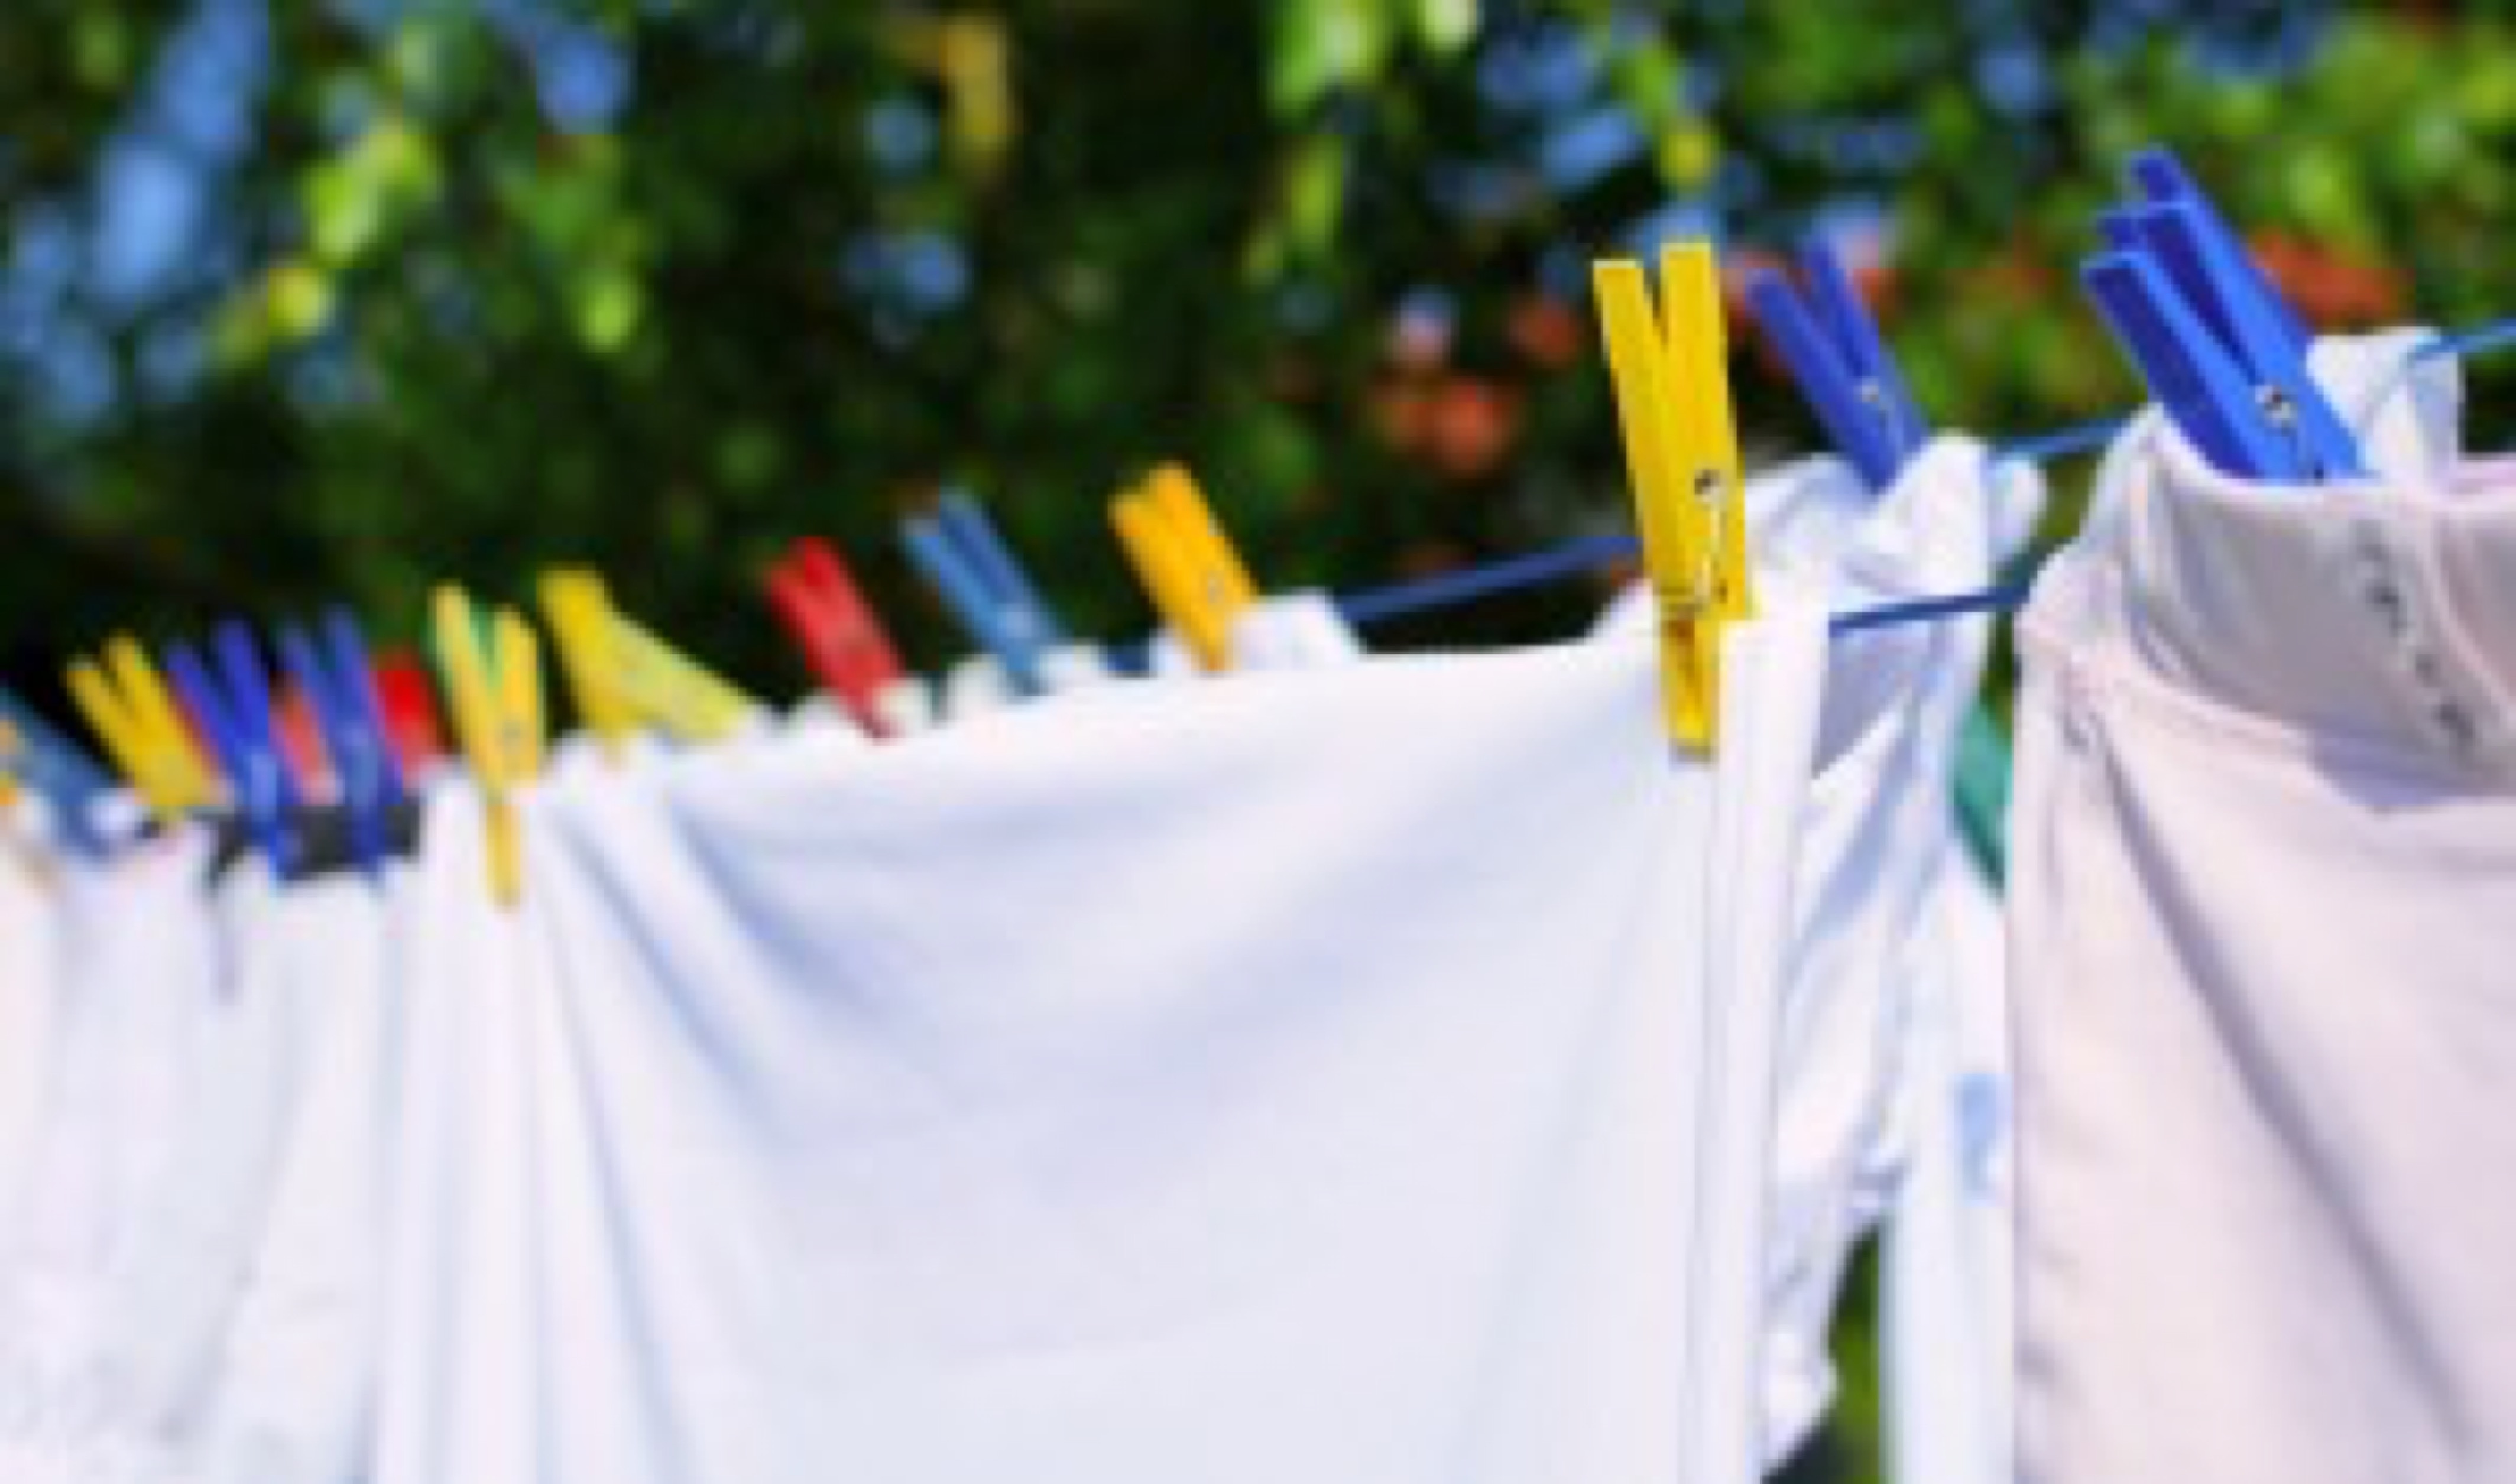 Fresh white laundry hang on the clothesline with colorful pegs.